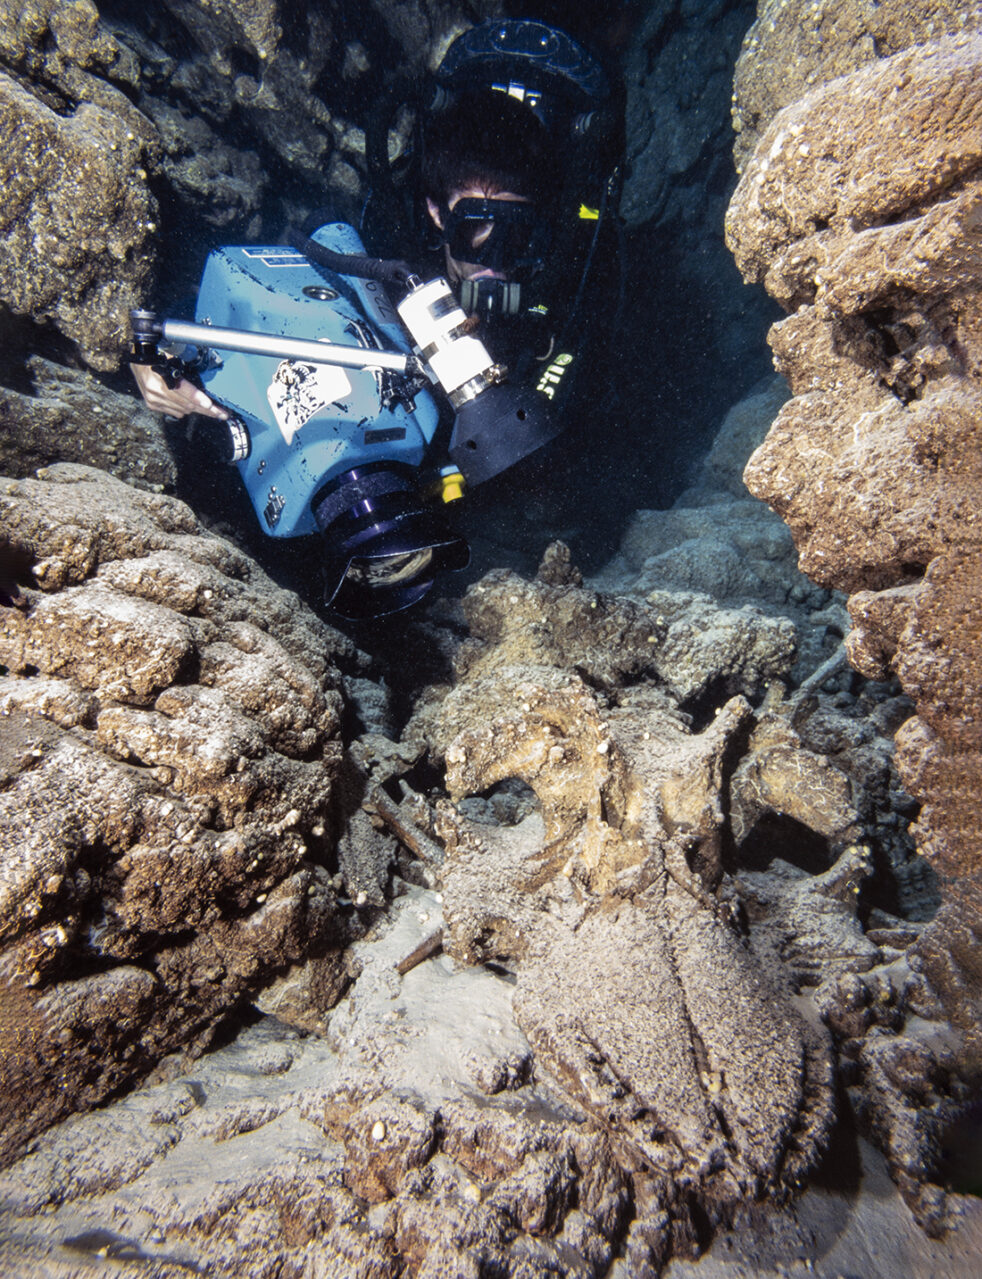 John McKenney diving a Biomarine Mark 15.5 Closed Circuit rebreather filming the skull which belonged to a large bull found at the 103-foot depth zone in the cave. 